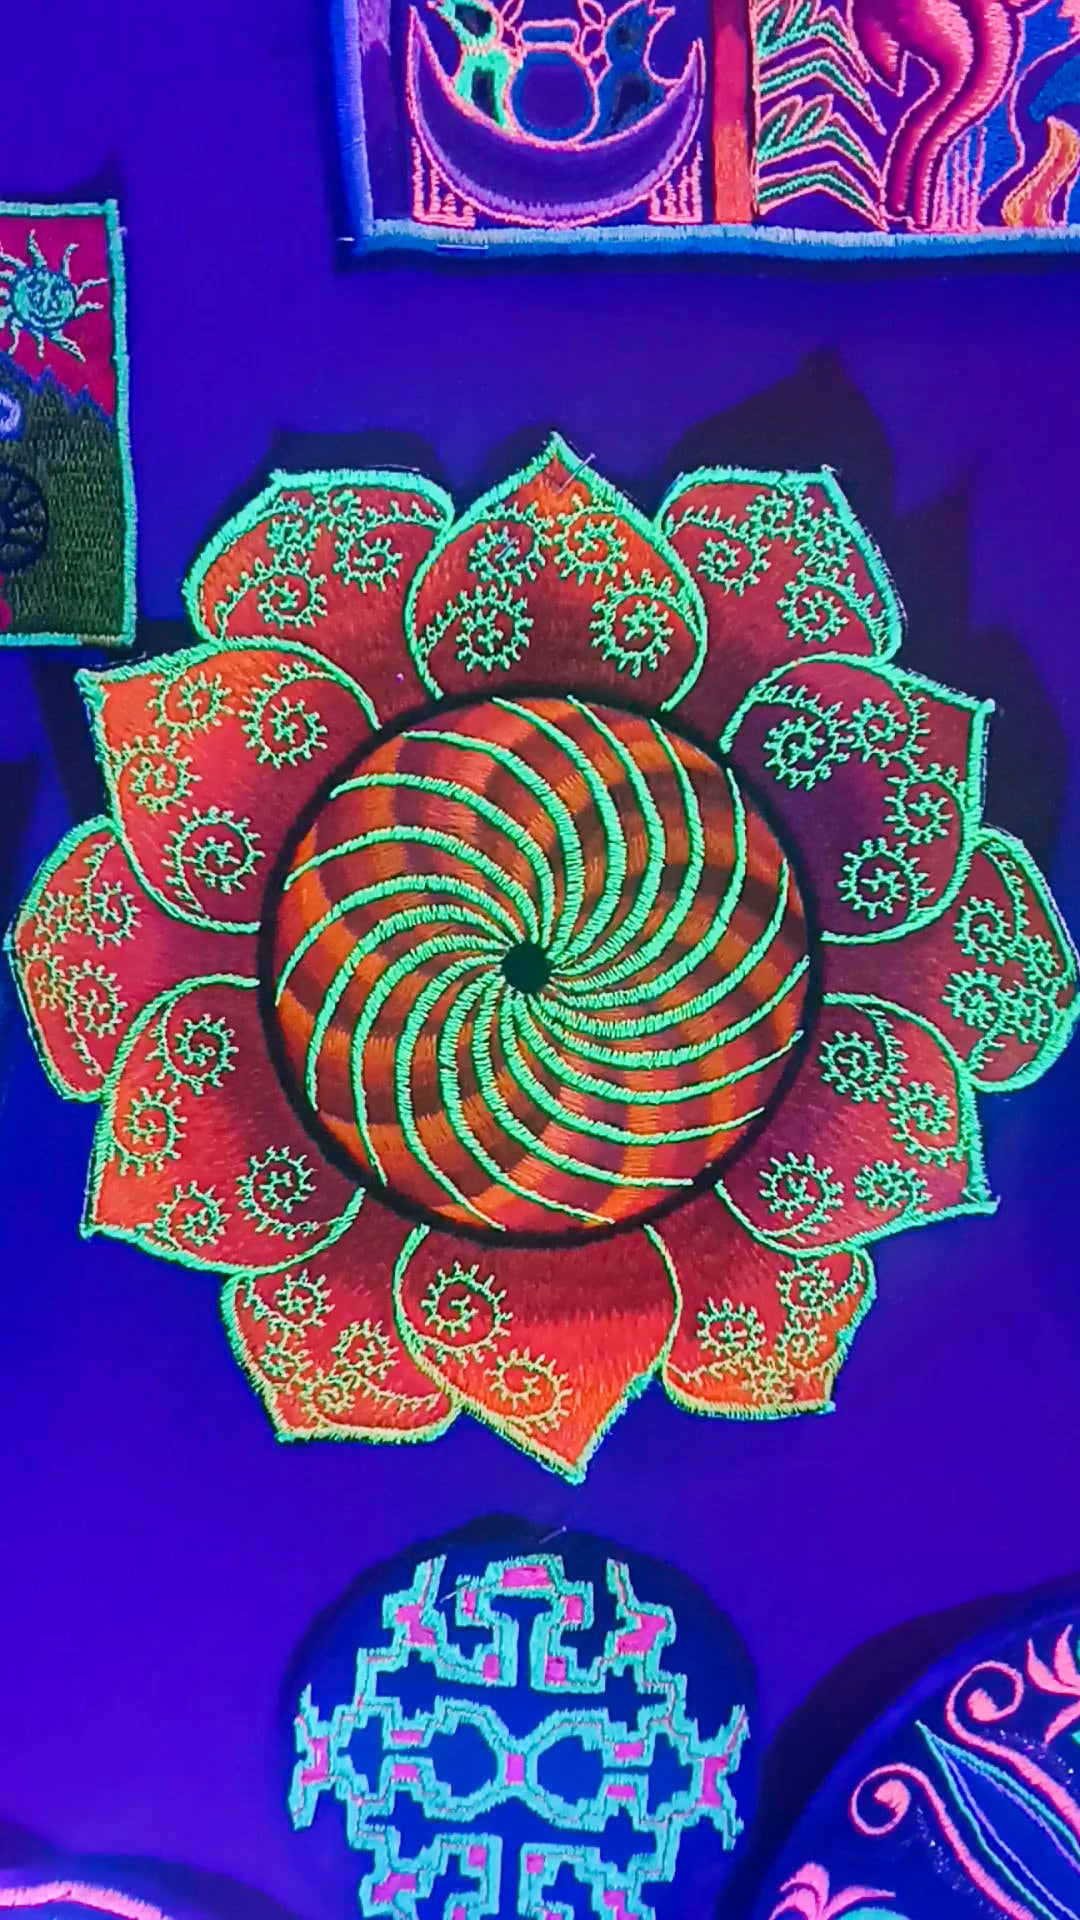 Fractal Mandala Spiral Patch Psychedelic Yantra Blacklight Glowing Goa Trance LSD Embroidery Psytrance Hippie Art Consciousness Expanding